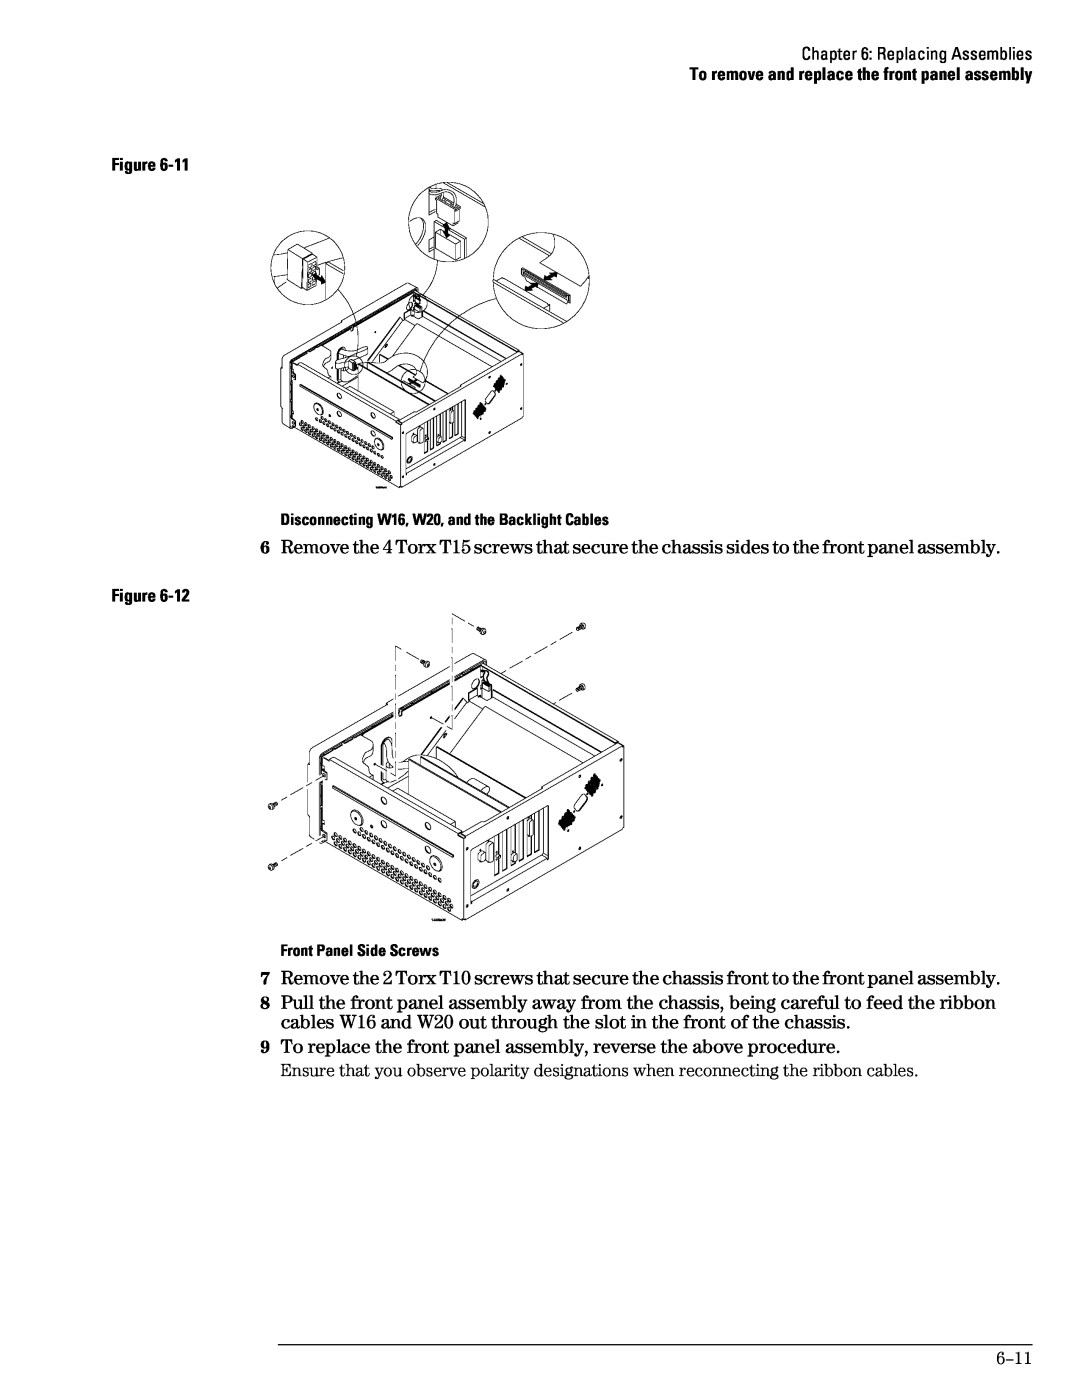 Agilent Technologies 46A, 45A, 54835A manual To replace the front panel assembly, reverse the above procedure 